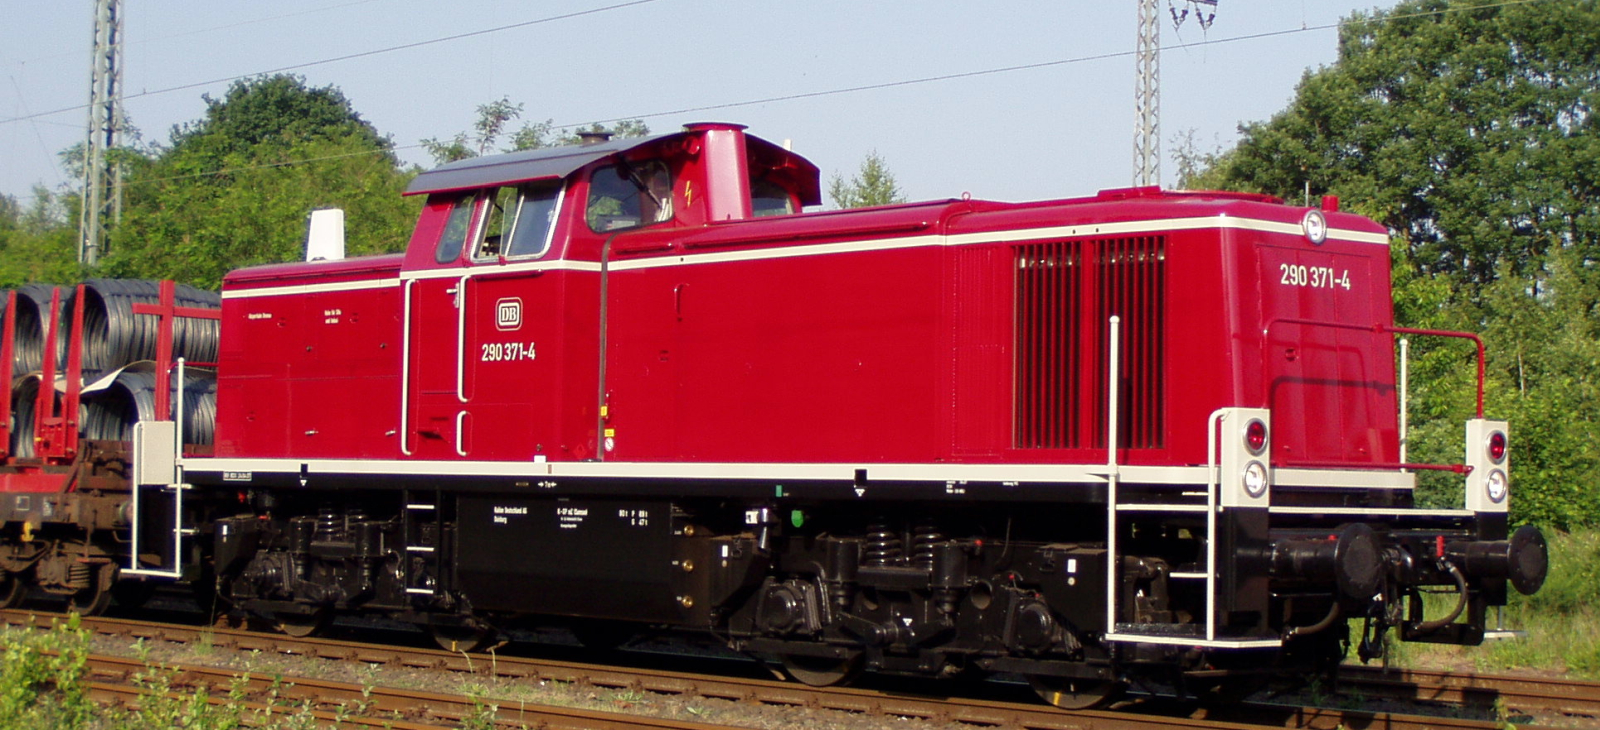 290 371 as a museum locomotive with Bundesbahn livery